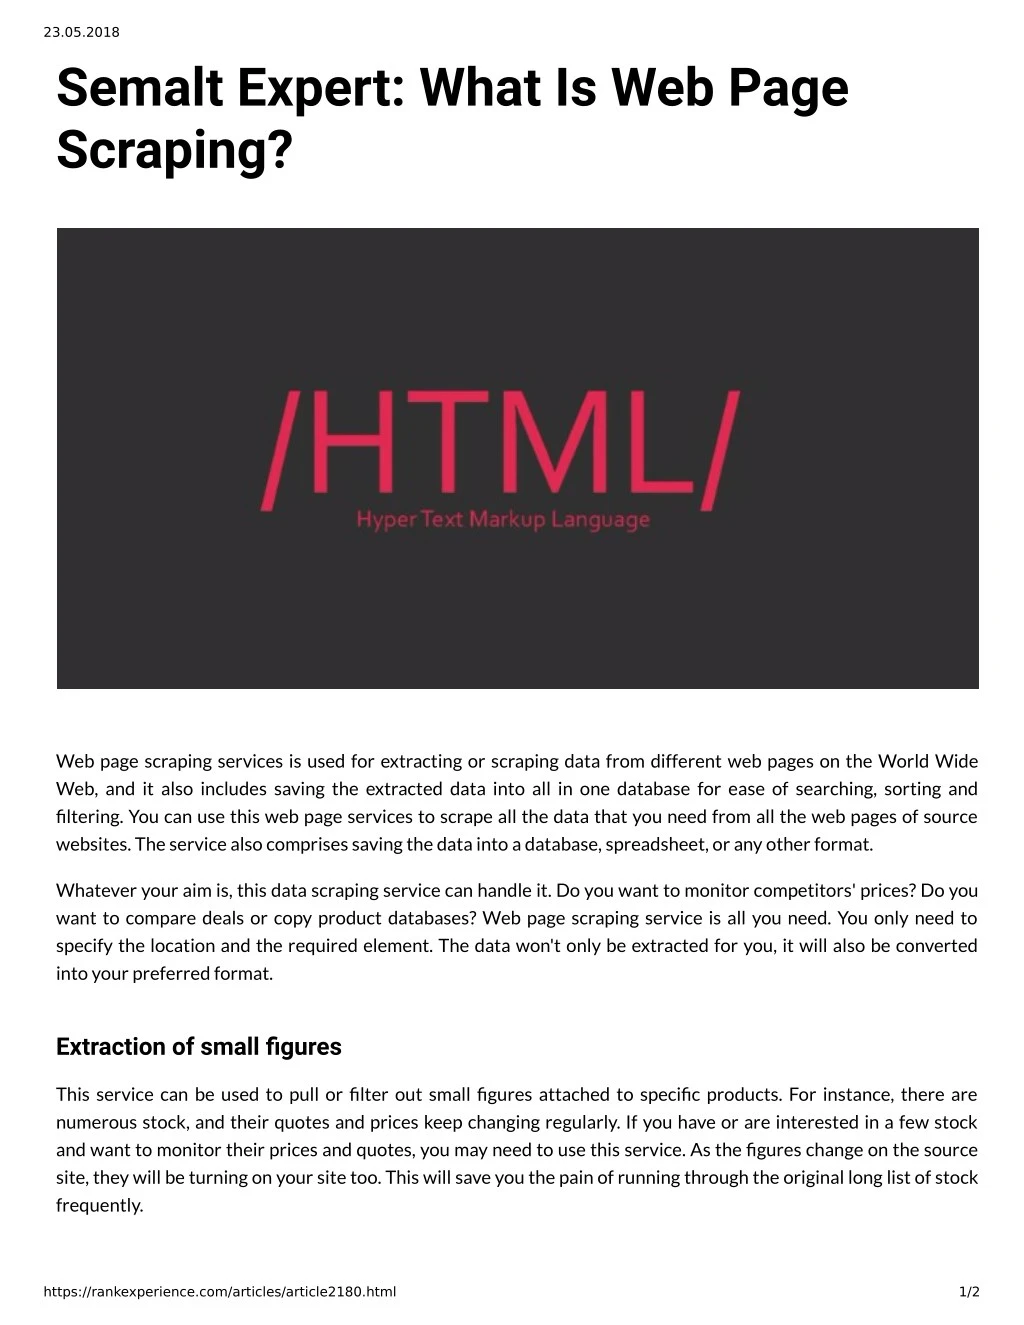 23 05 2018 semalt expert what is web page scraping